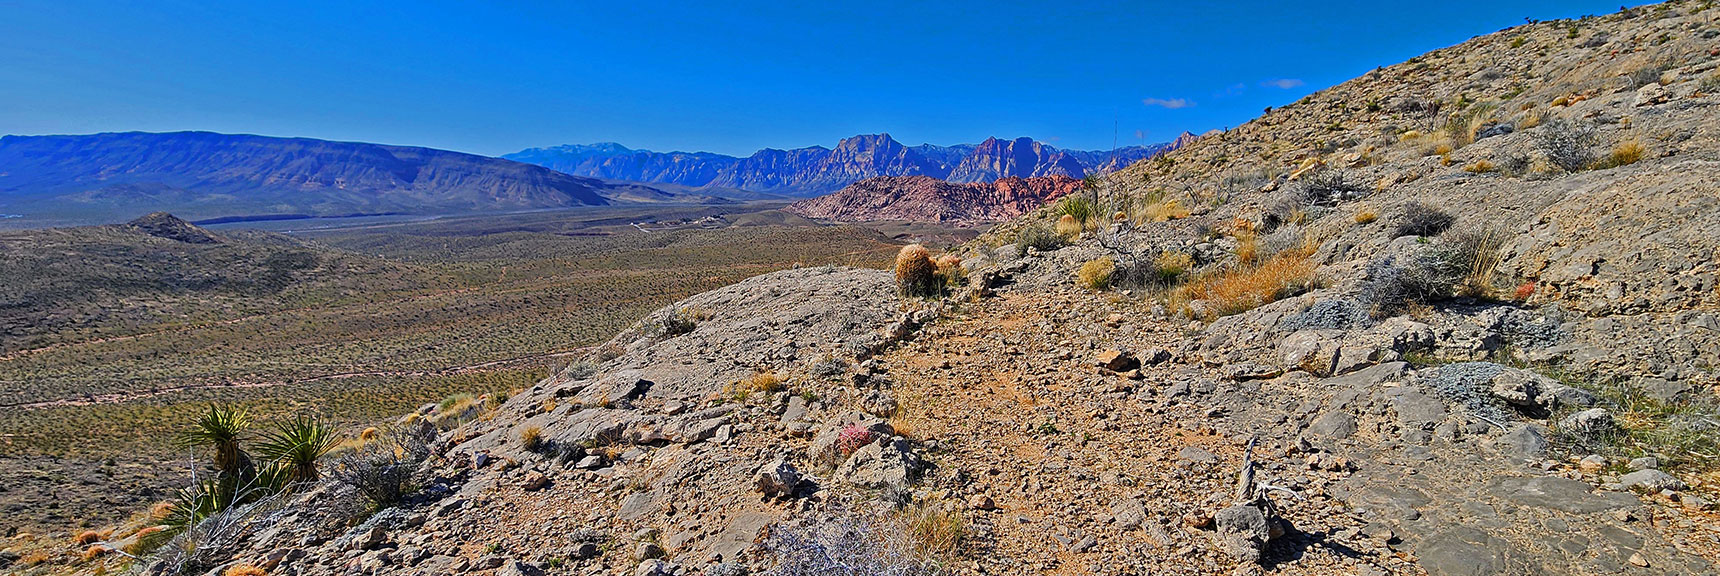 Find a Rock-Lined Trail on the Ridgeline: "Gray Cap Lower Ridgeline Trail". | Gray Cap Ridge Southeast Summit | La Madre Mountains Wilderness, Nevada